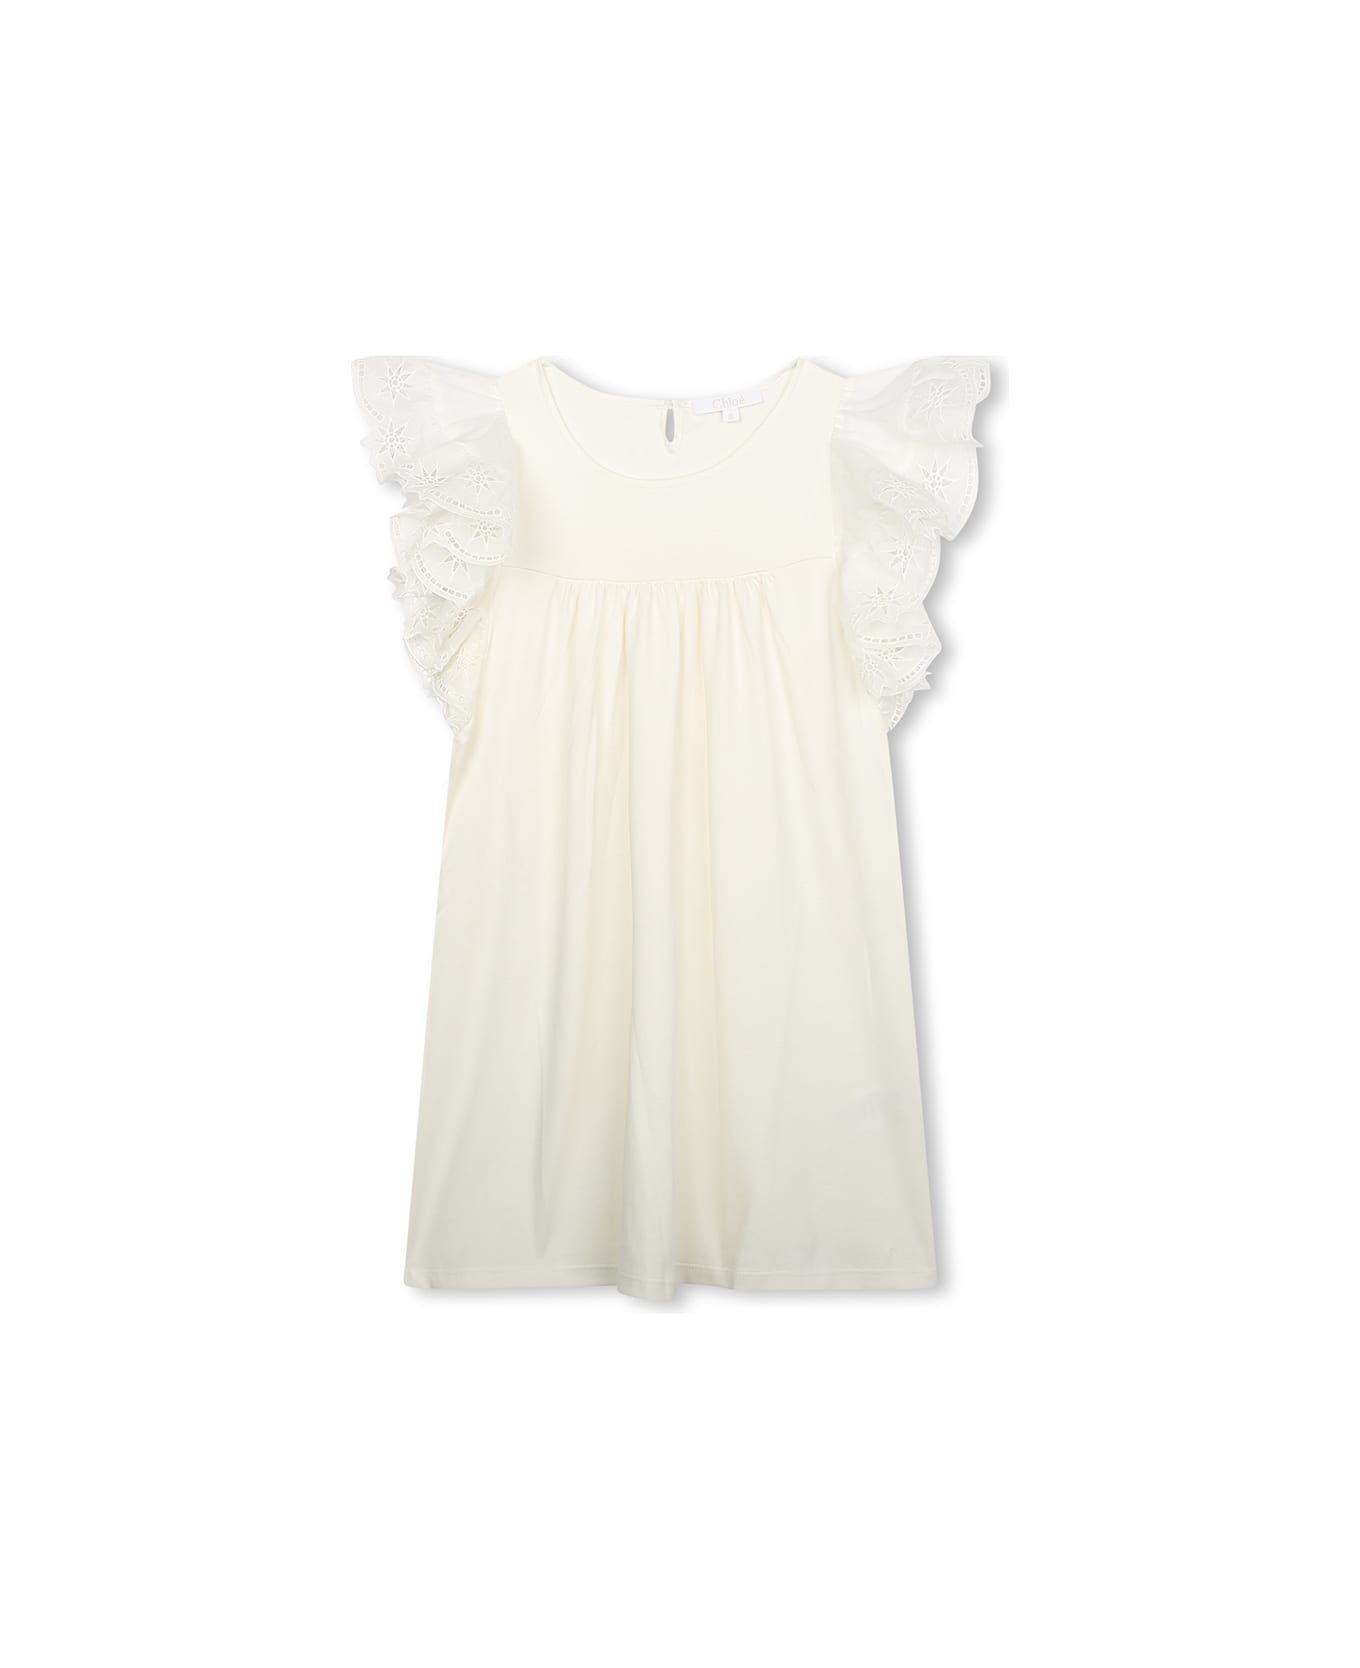 Chloé White Dress With Embroidered Ruffles - White